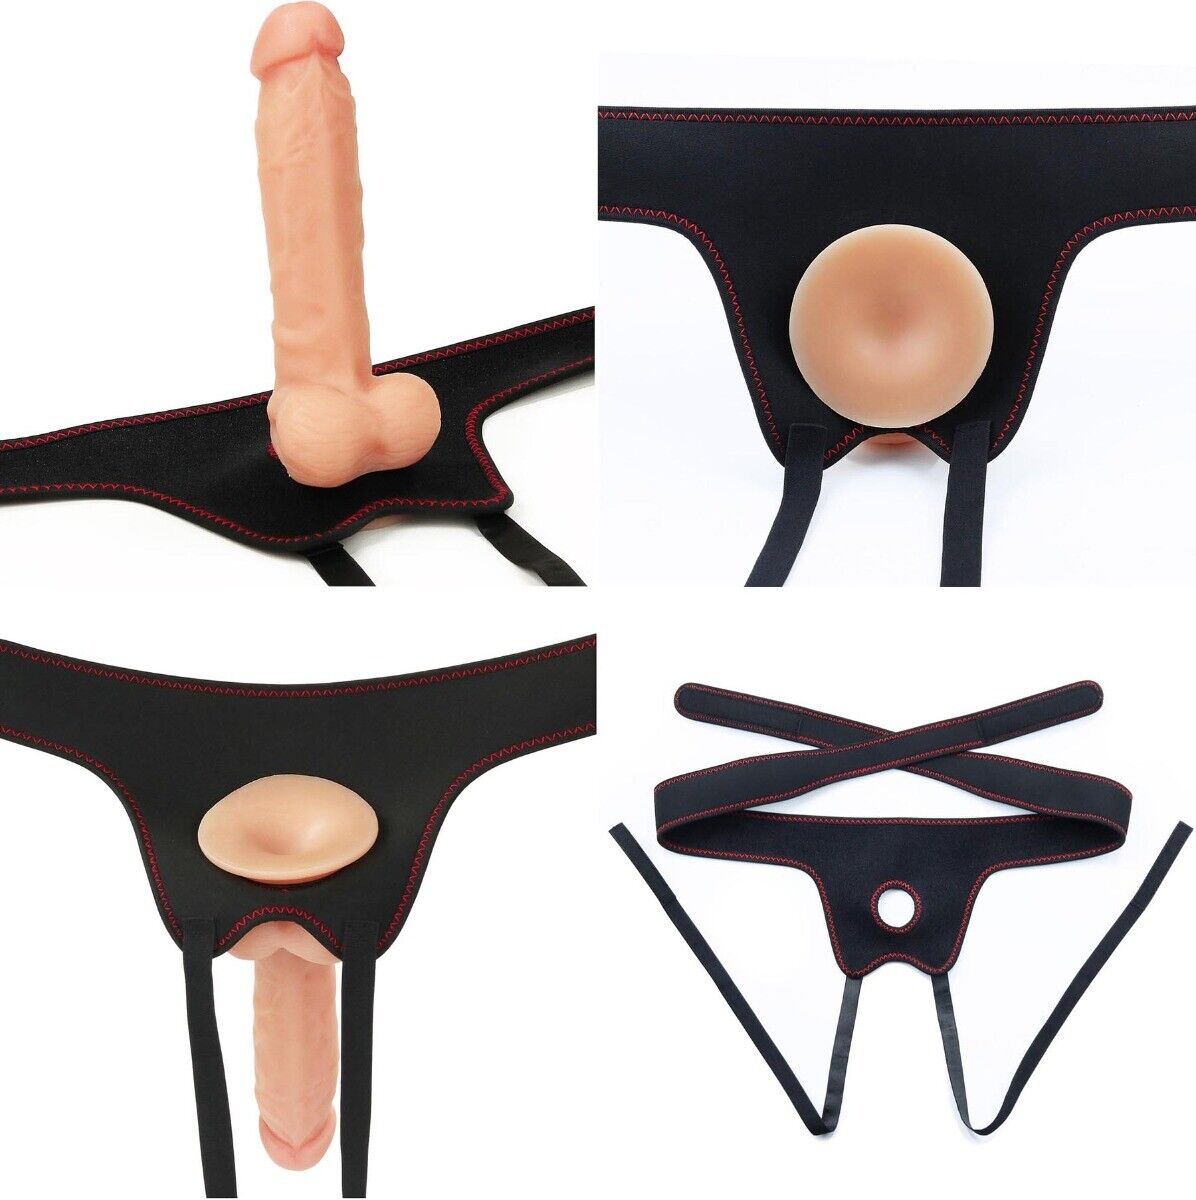 Fully Adjustable Beginner Strap-on Harness Set with Realistic Dildo Dong